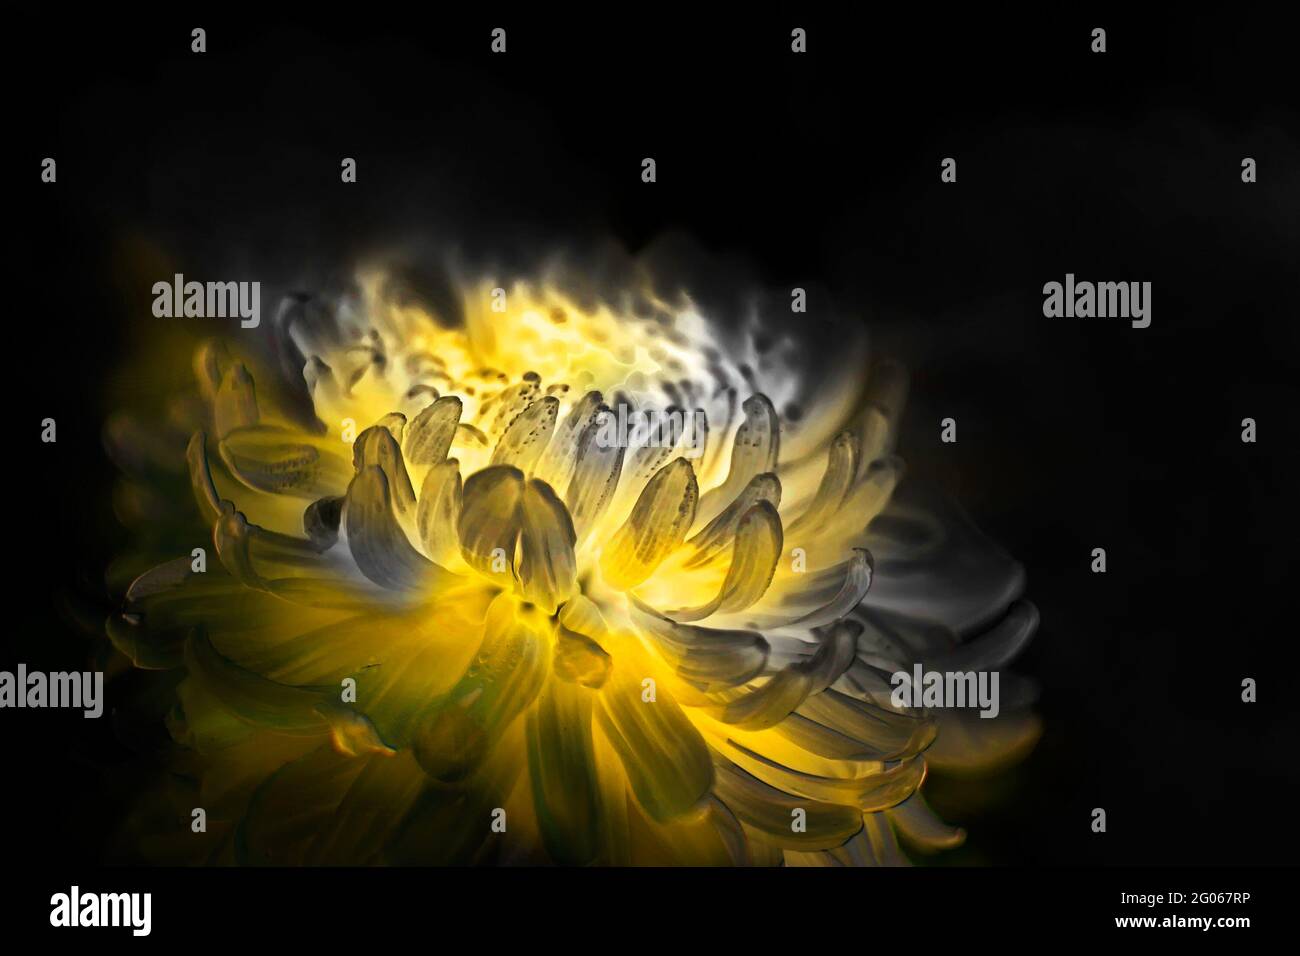 Artistic flower image, yellow dahlia flower petals with dark black contrasting back ground, nature stock photograph Stock Photo